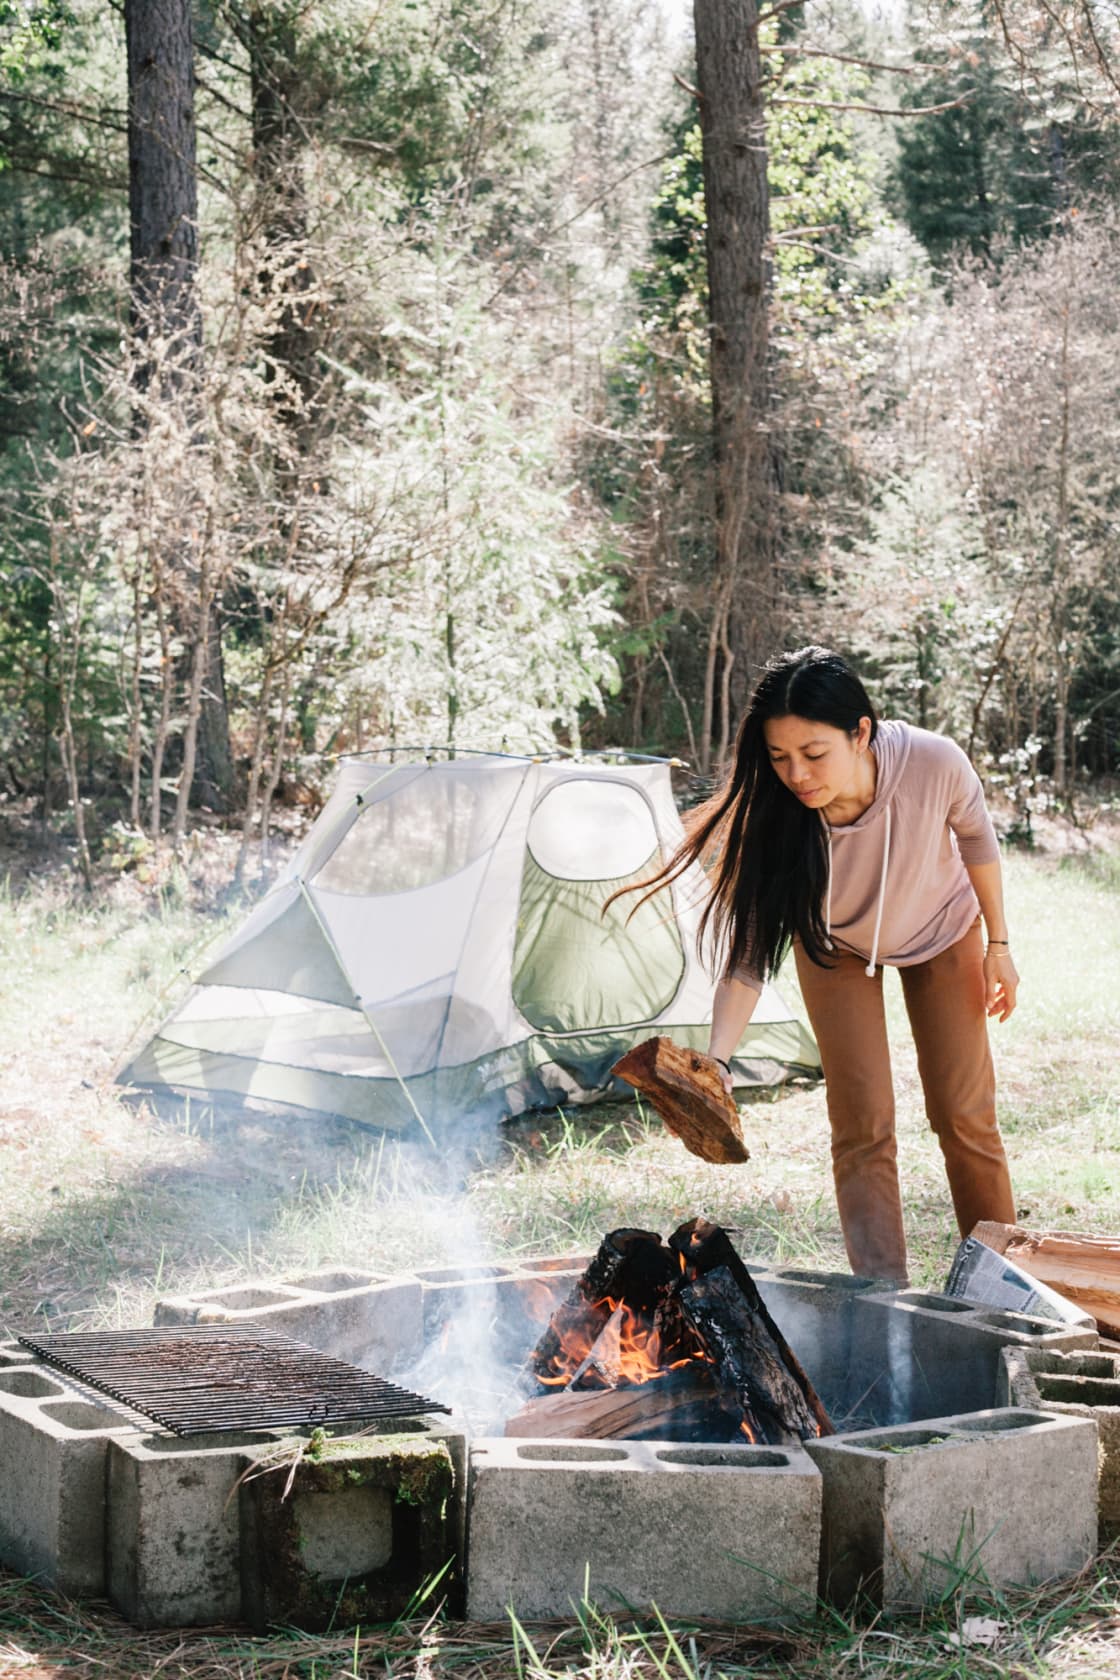 We really love the grill on the fire pit, which makes campsite meals so much easier.